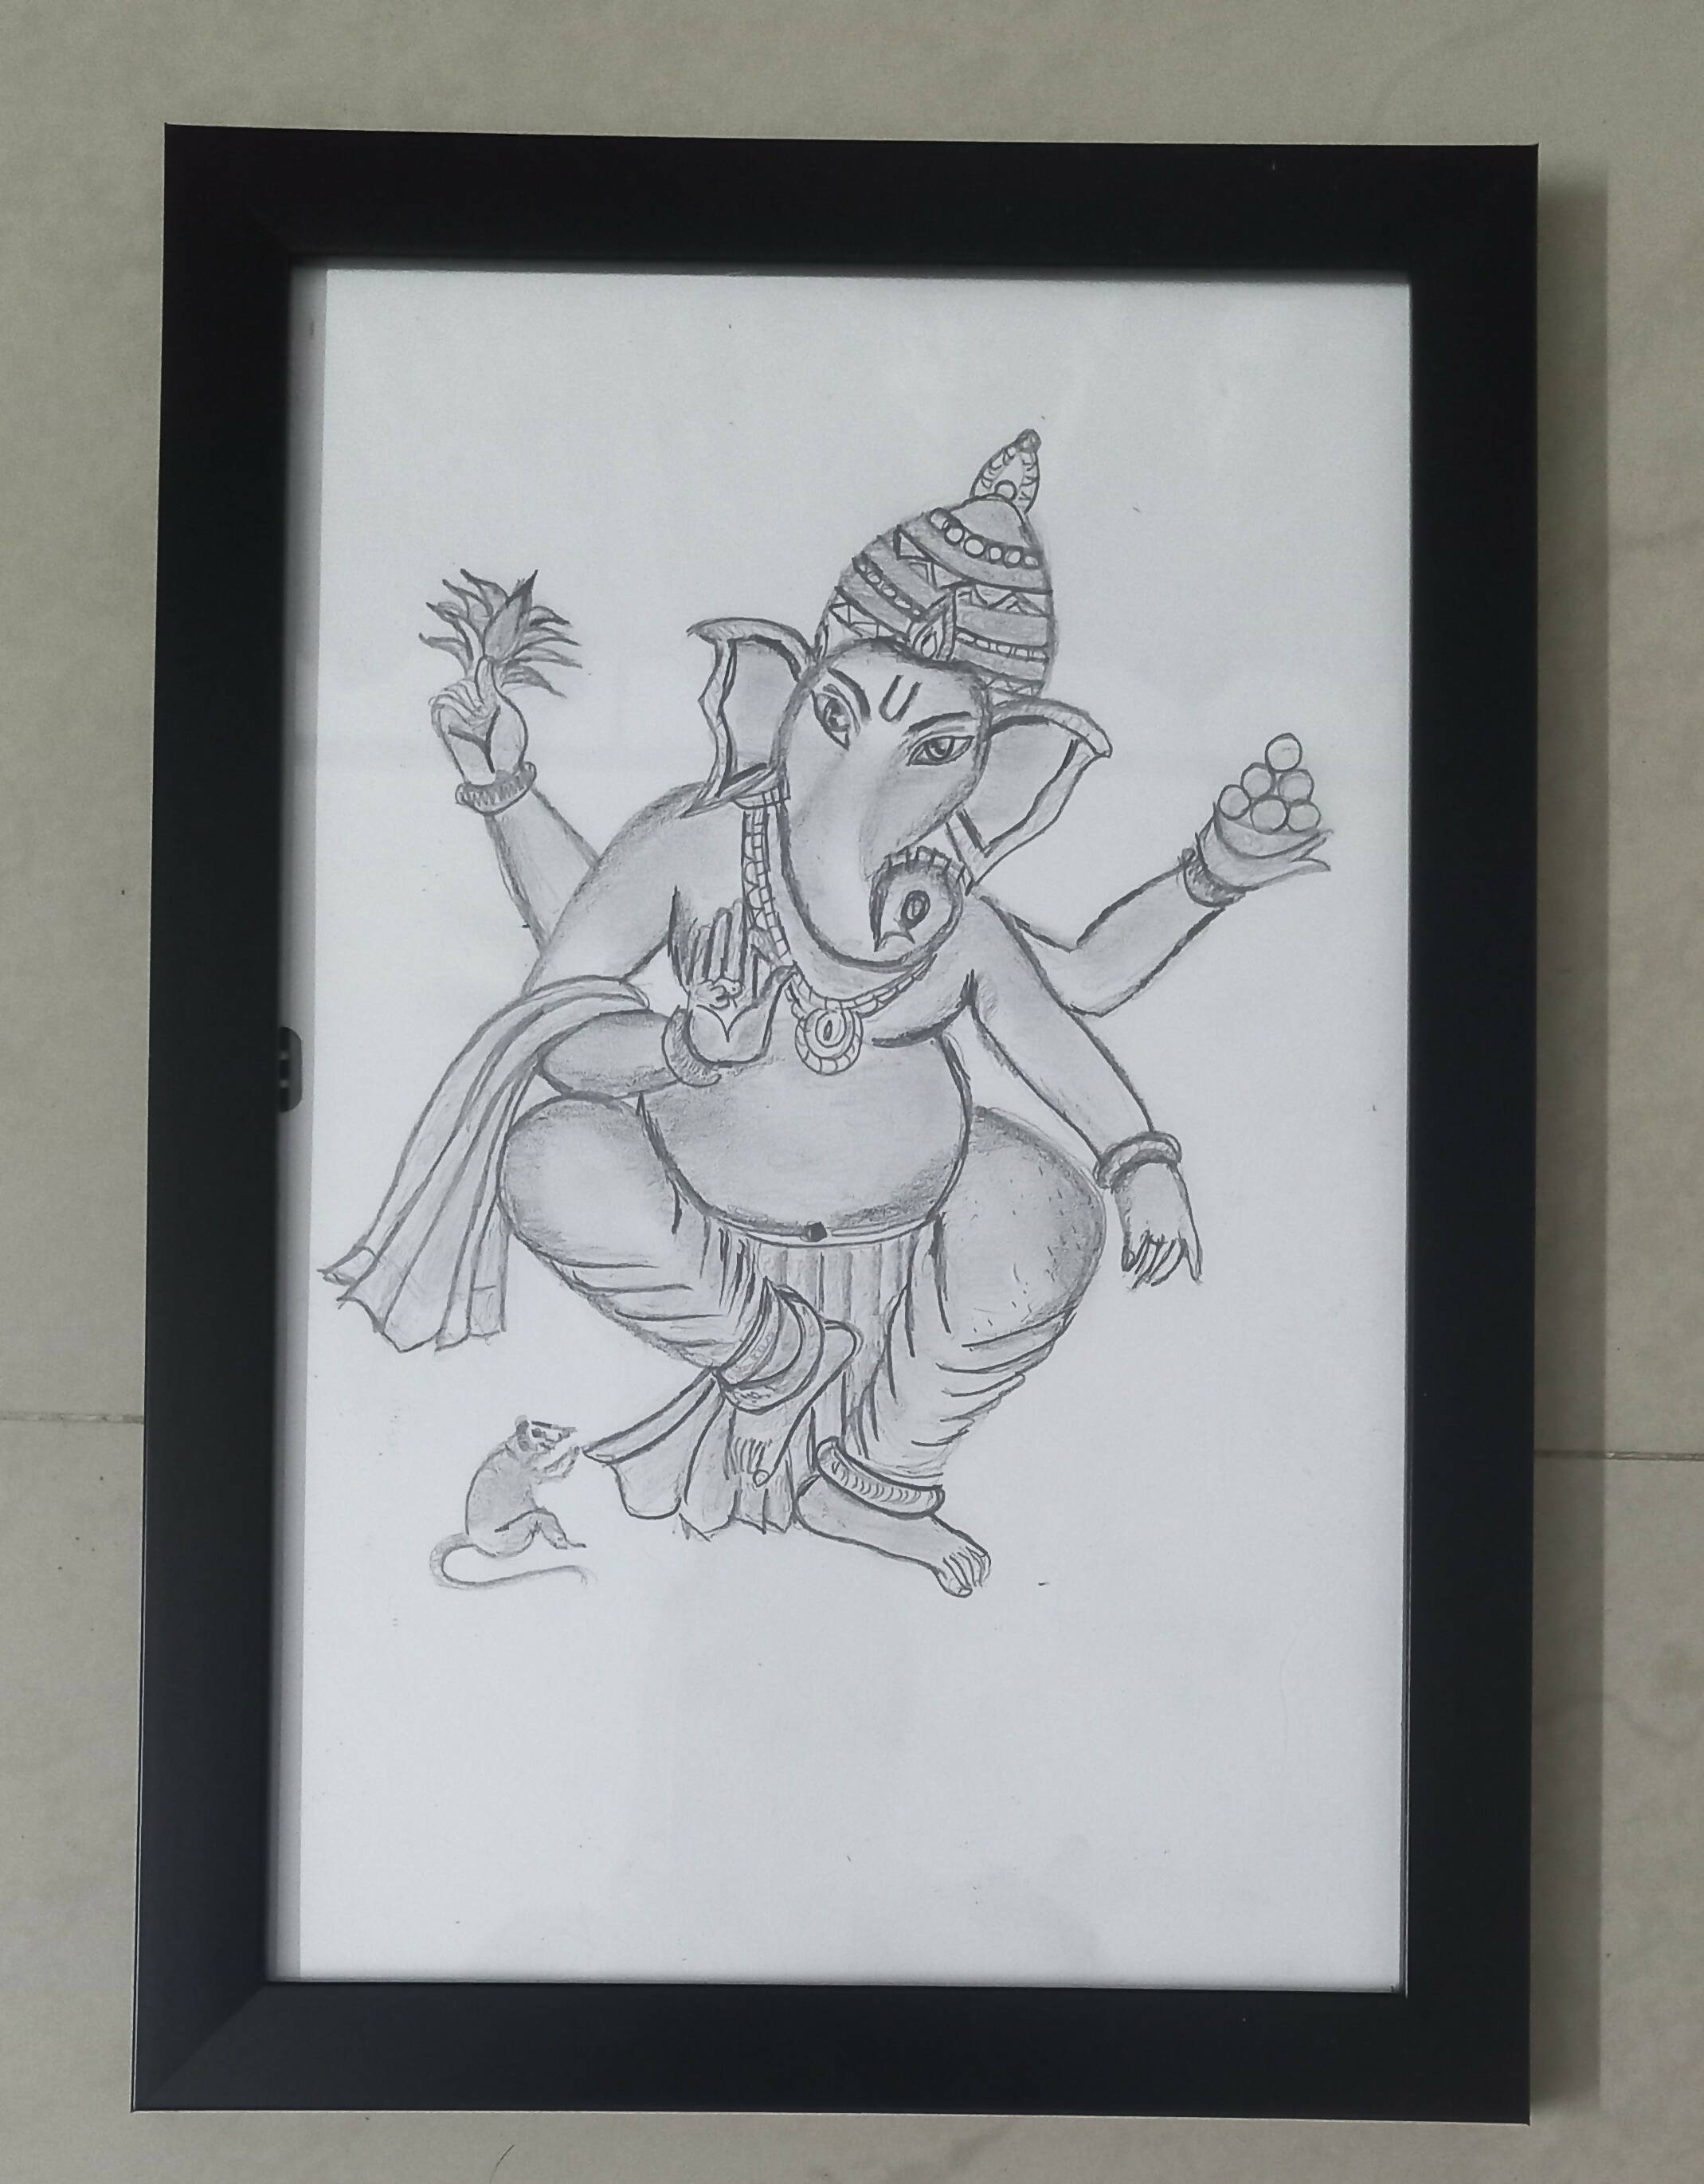 Done Pencil sketch of Ganesha by me  rdrawing